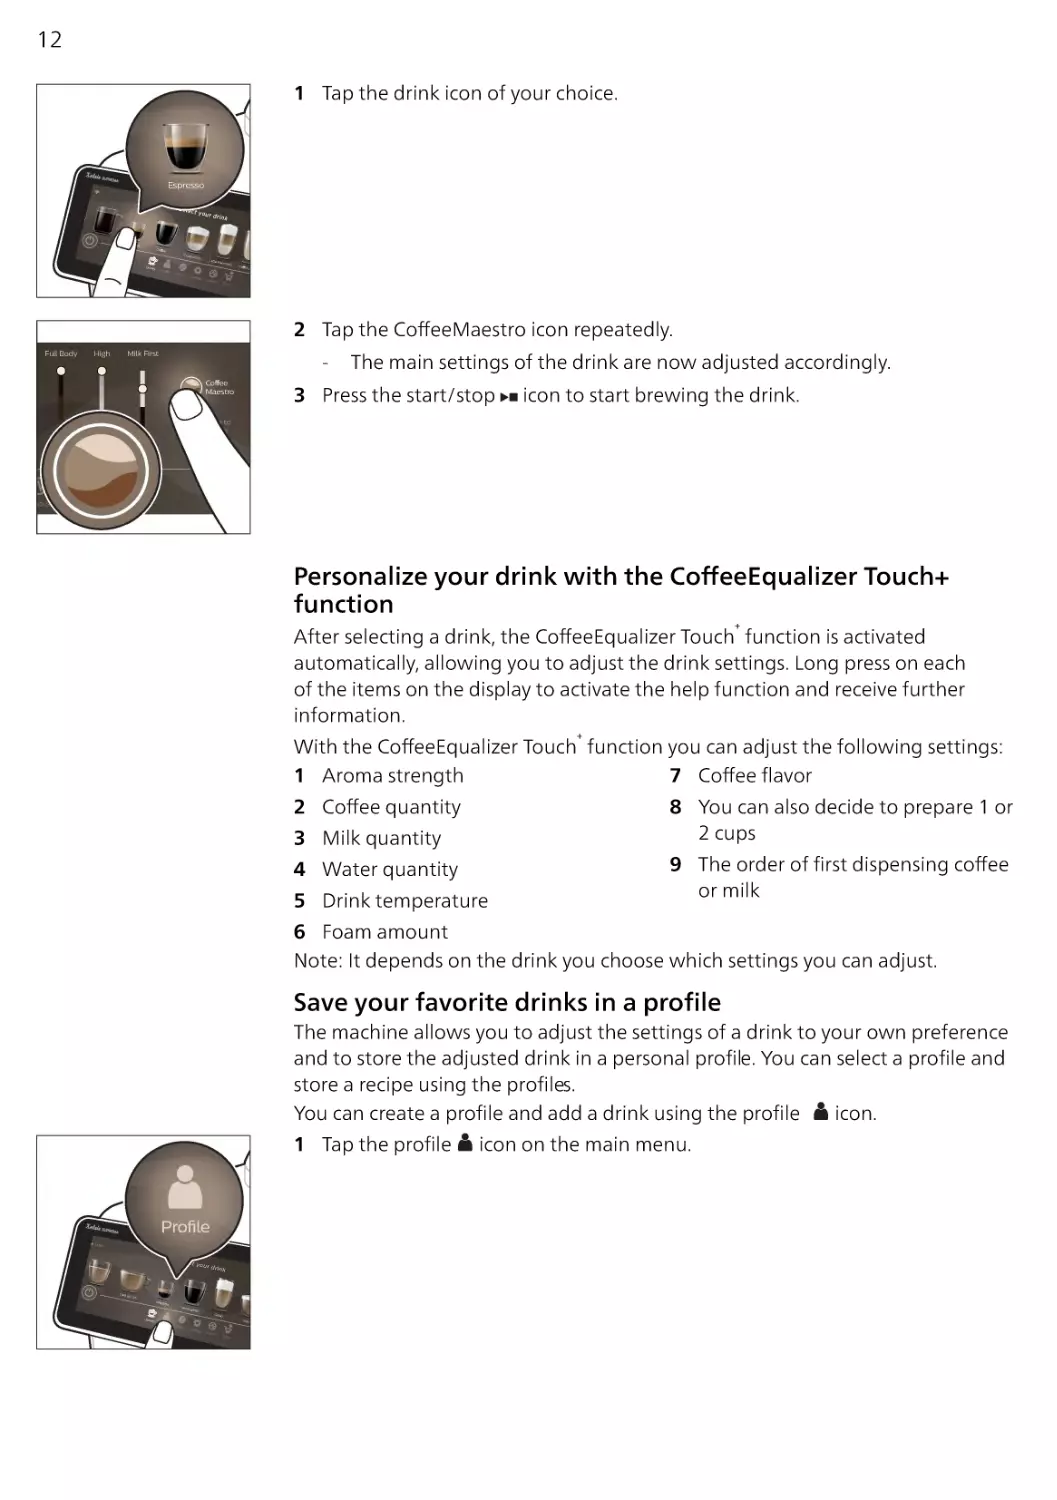 Personalize your drink with the CoffeeEqualizer Touch+ function
Save your favorite drinks in a profile